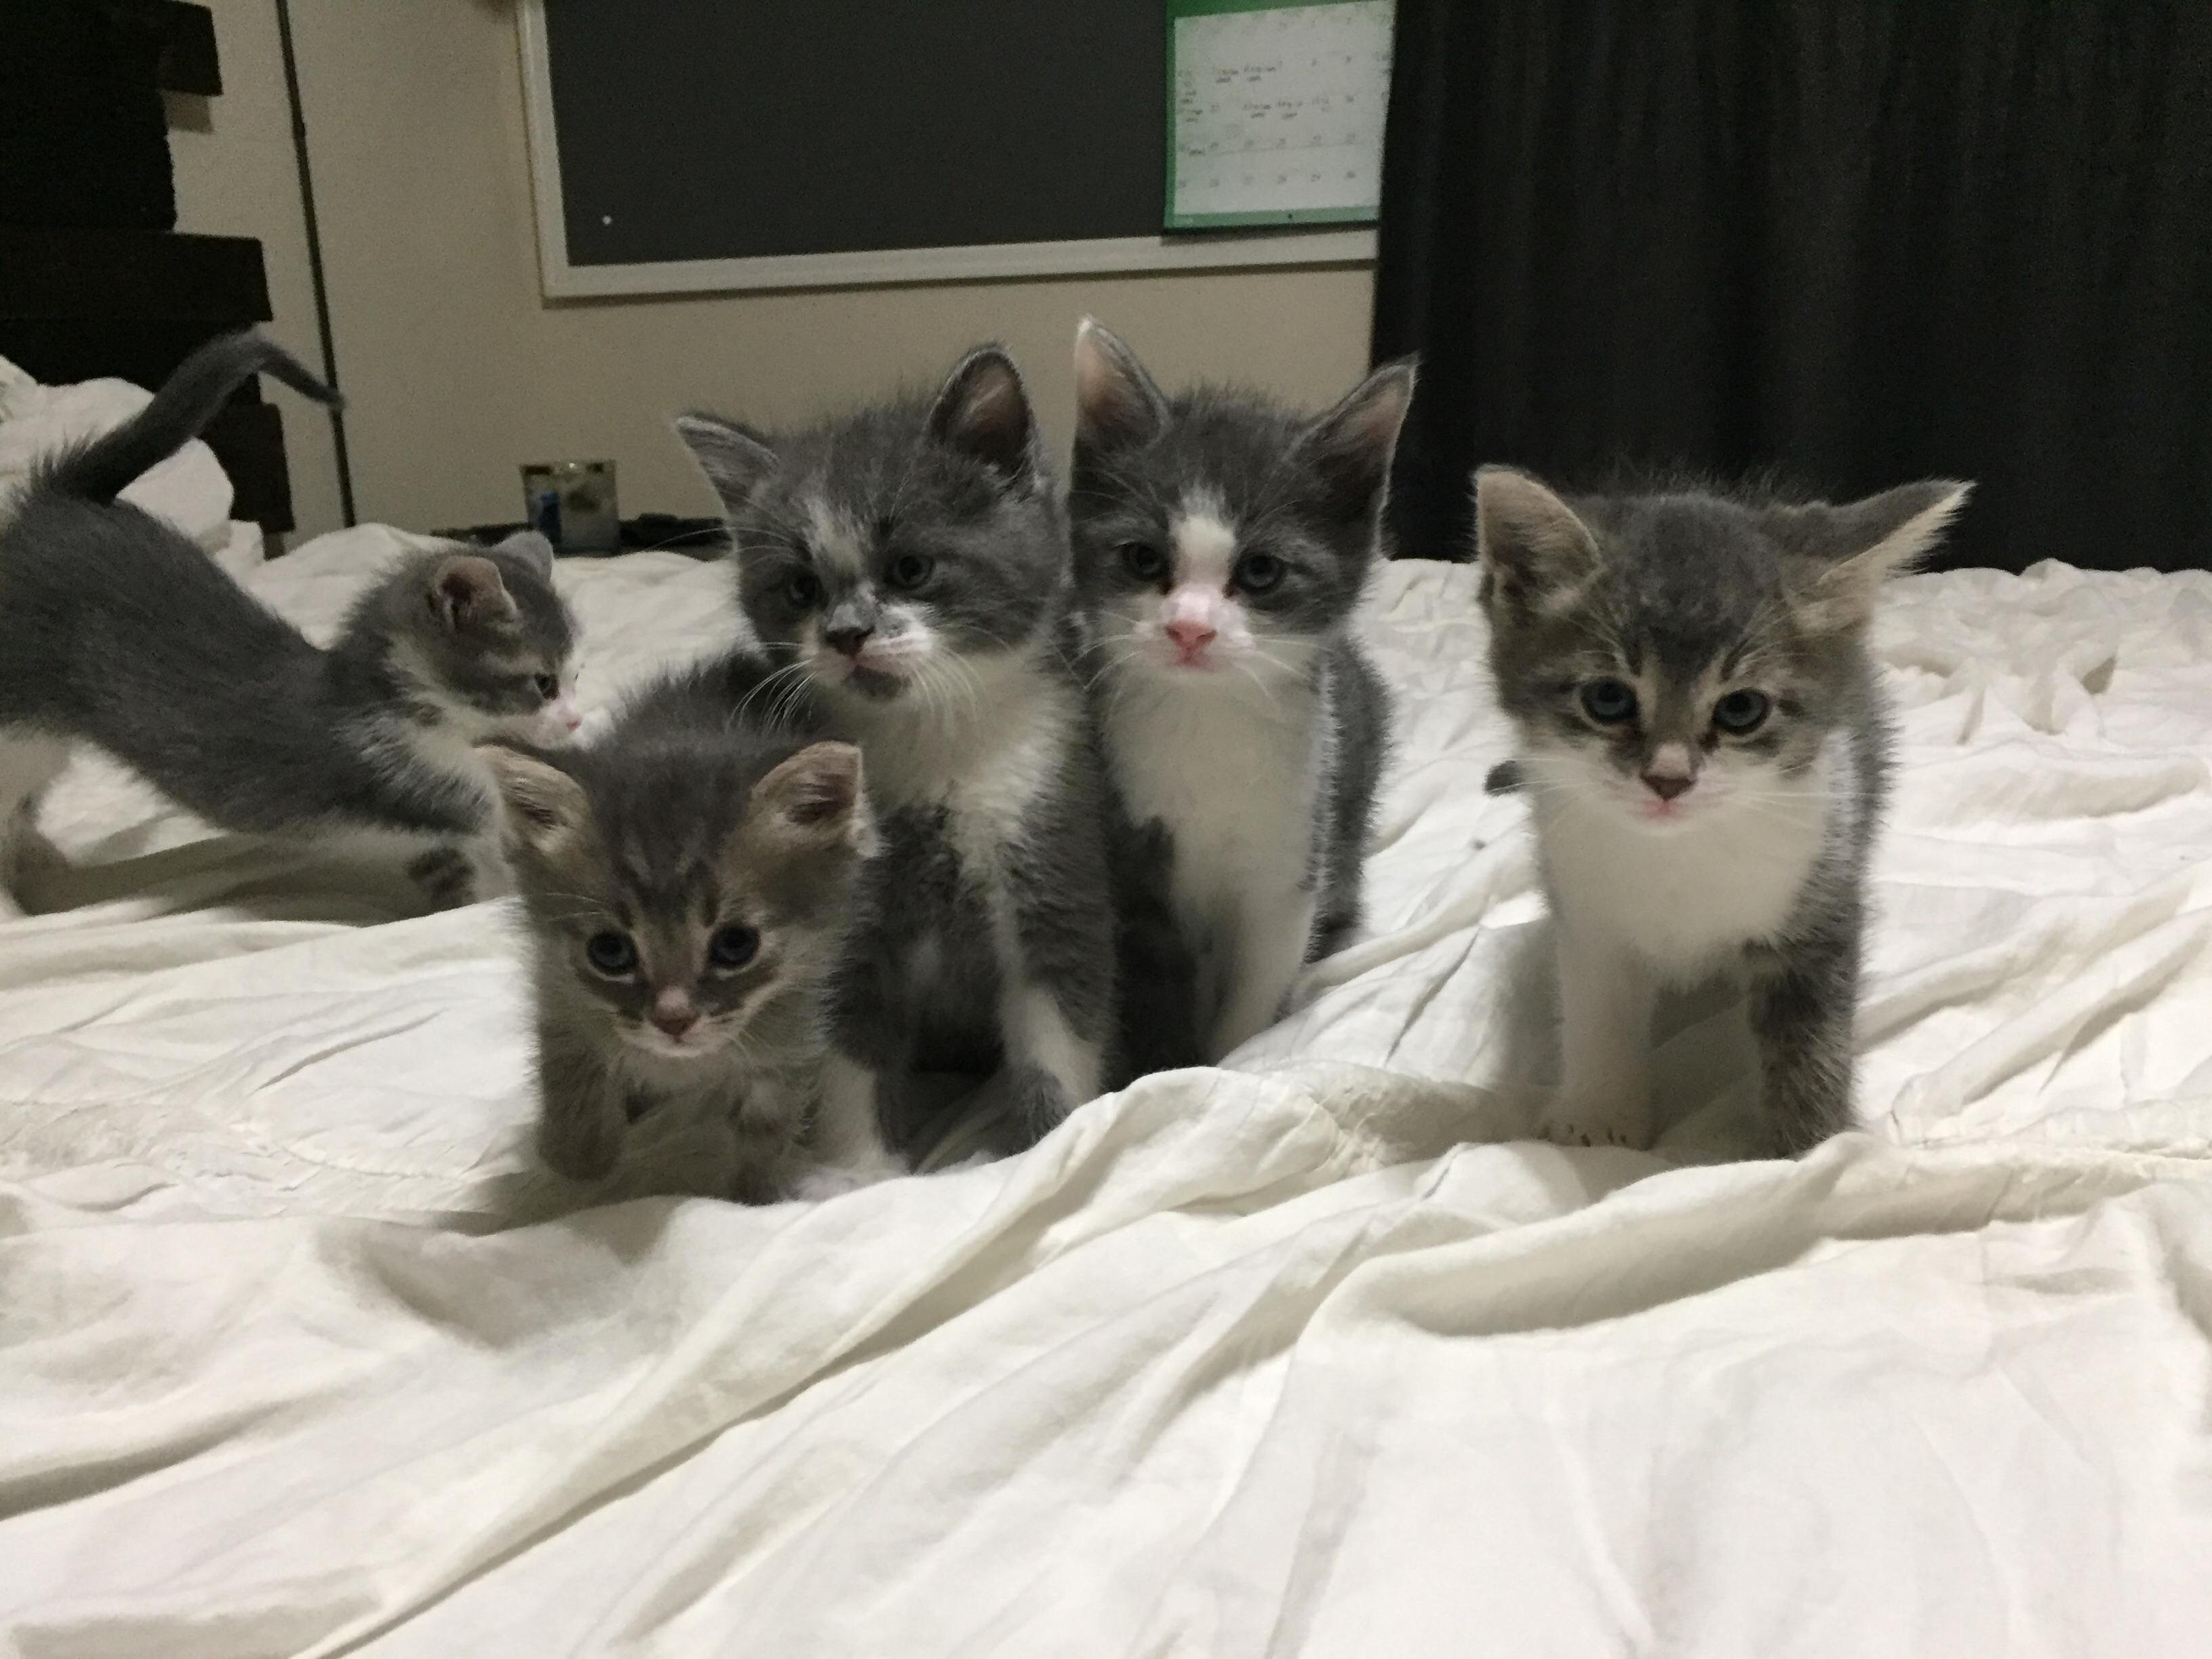 Trying to get a picture of all of them together is hard… but theyre so cute